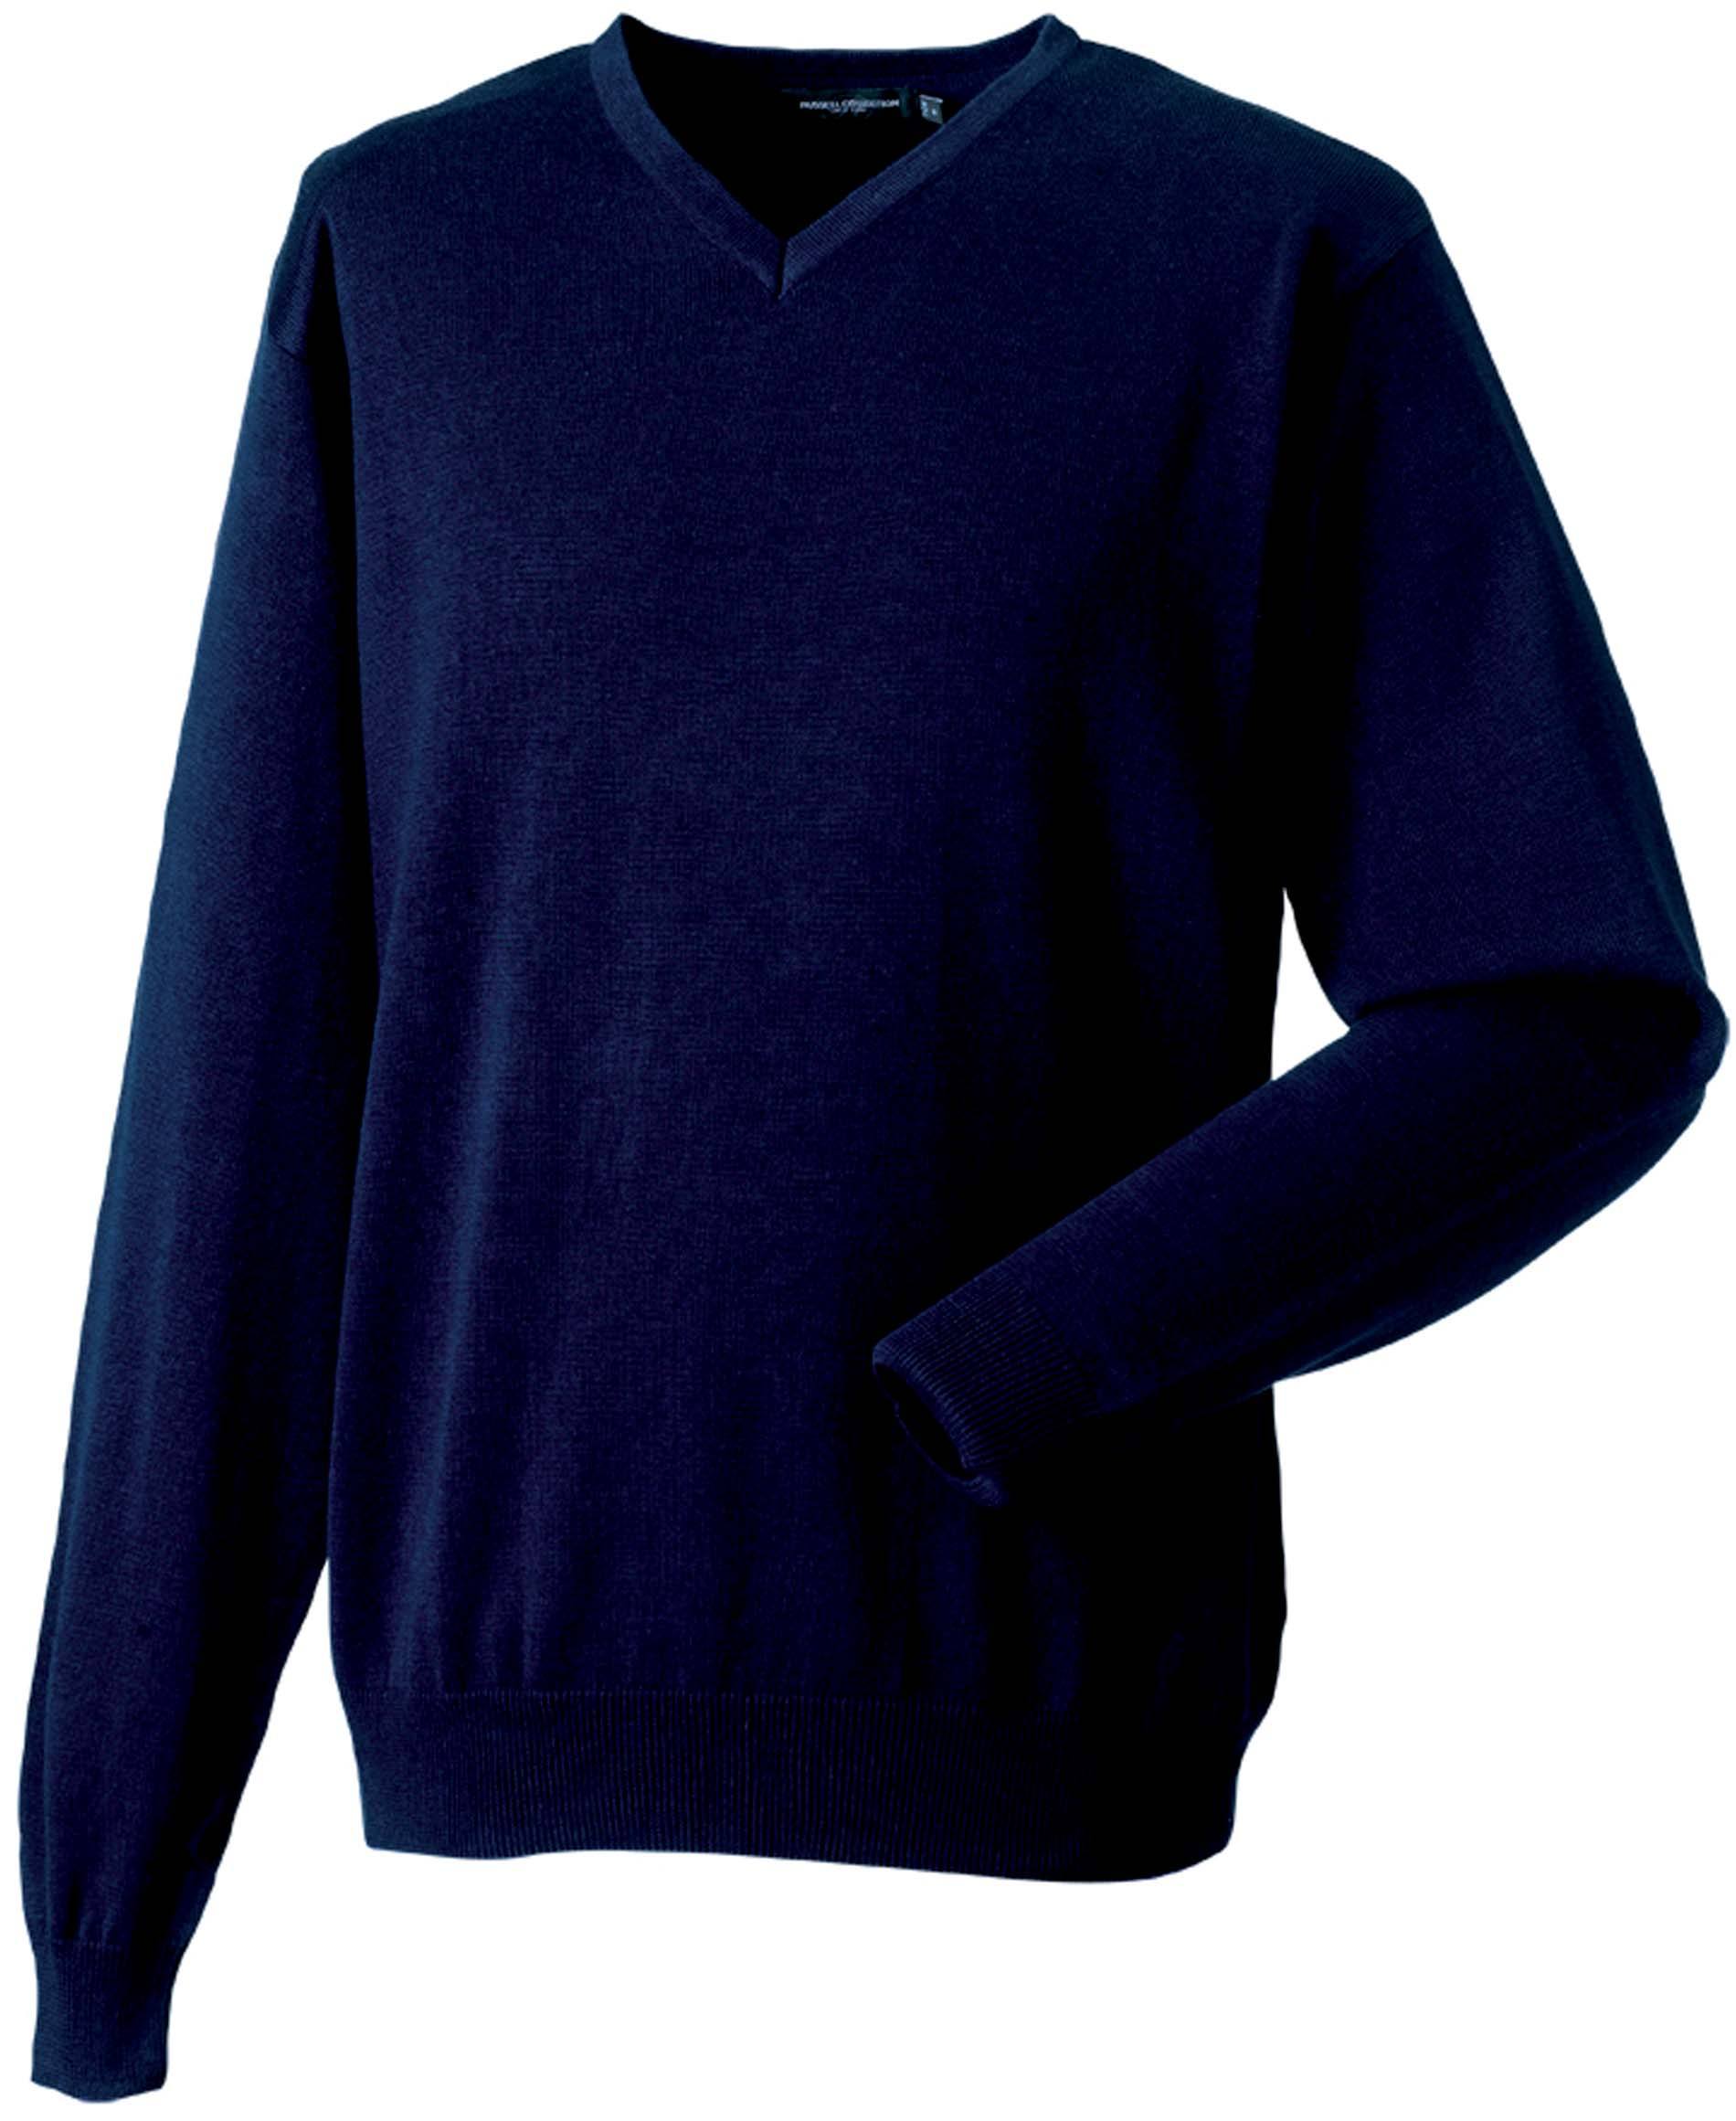 Pullover personnalisé col V-RU710M pull 1/4 zips Russel french navy S 